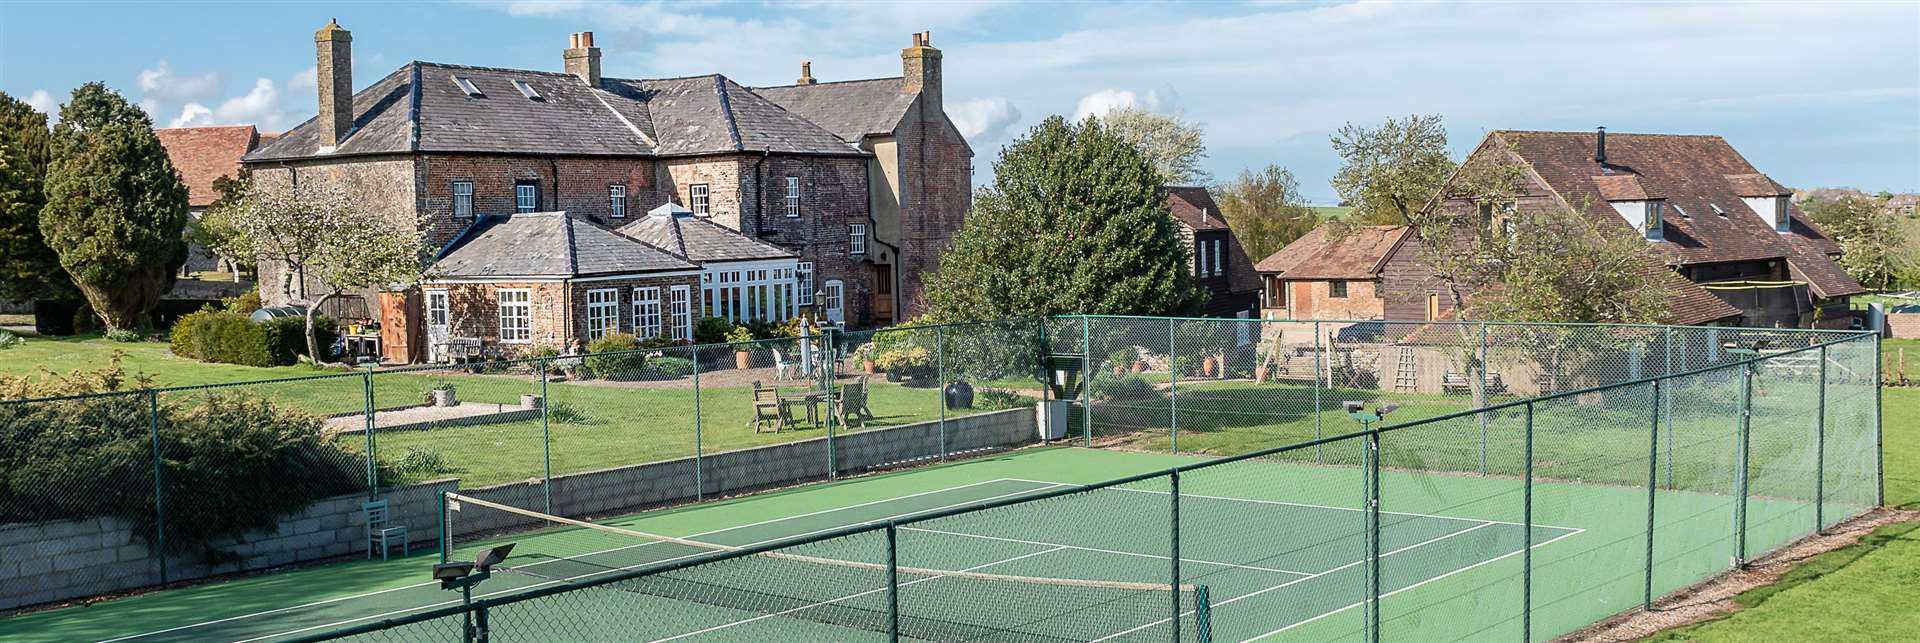 The property comes with an all-weather tennis court